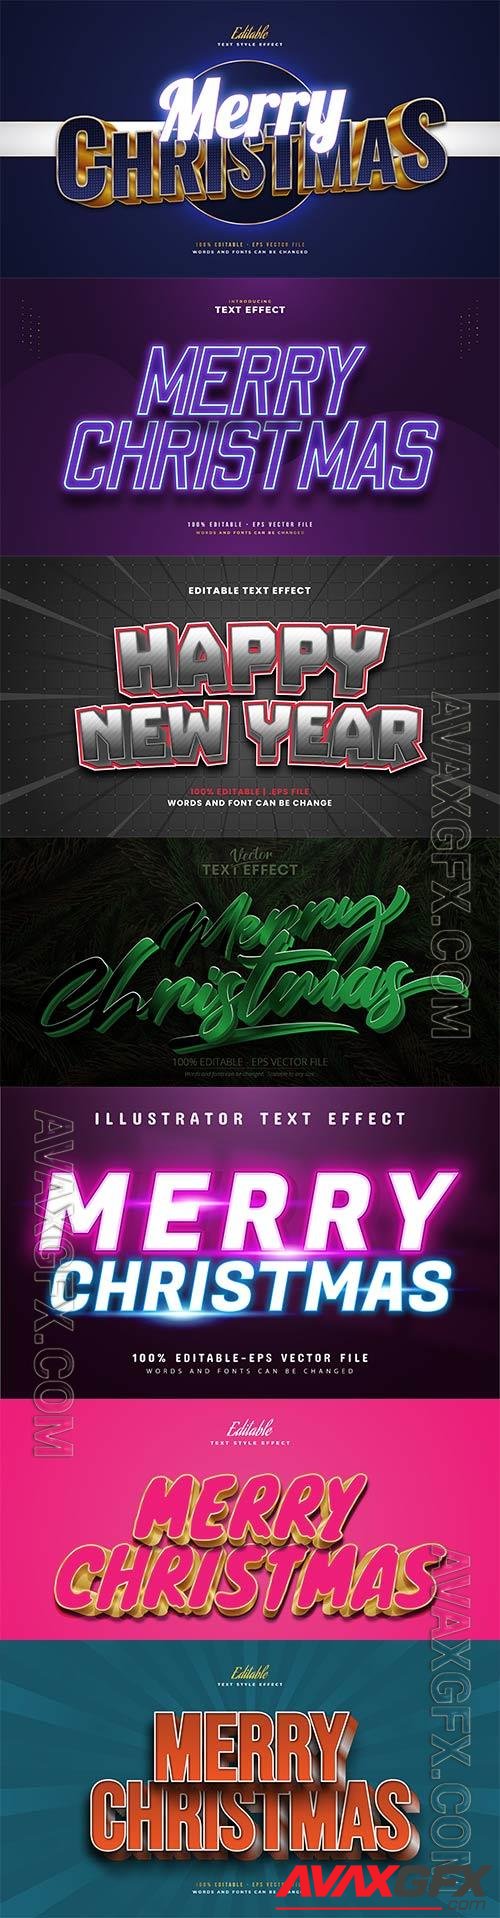 Merry christmas and happy new year 2022 editable vector text effects vol 29